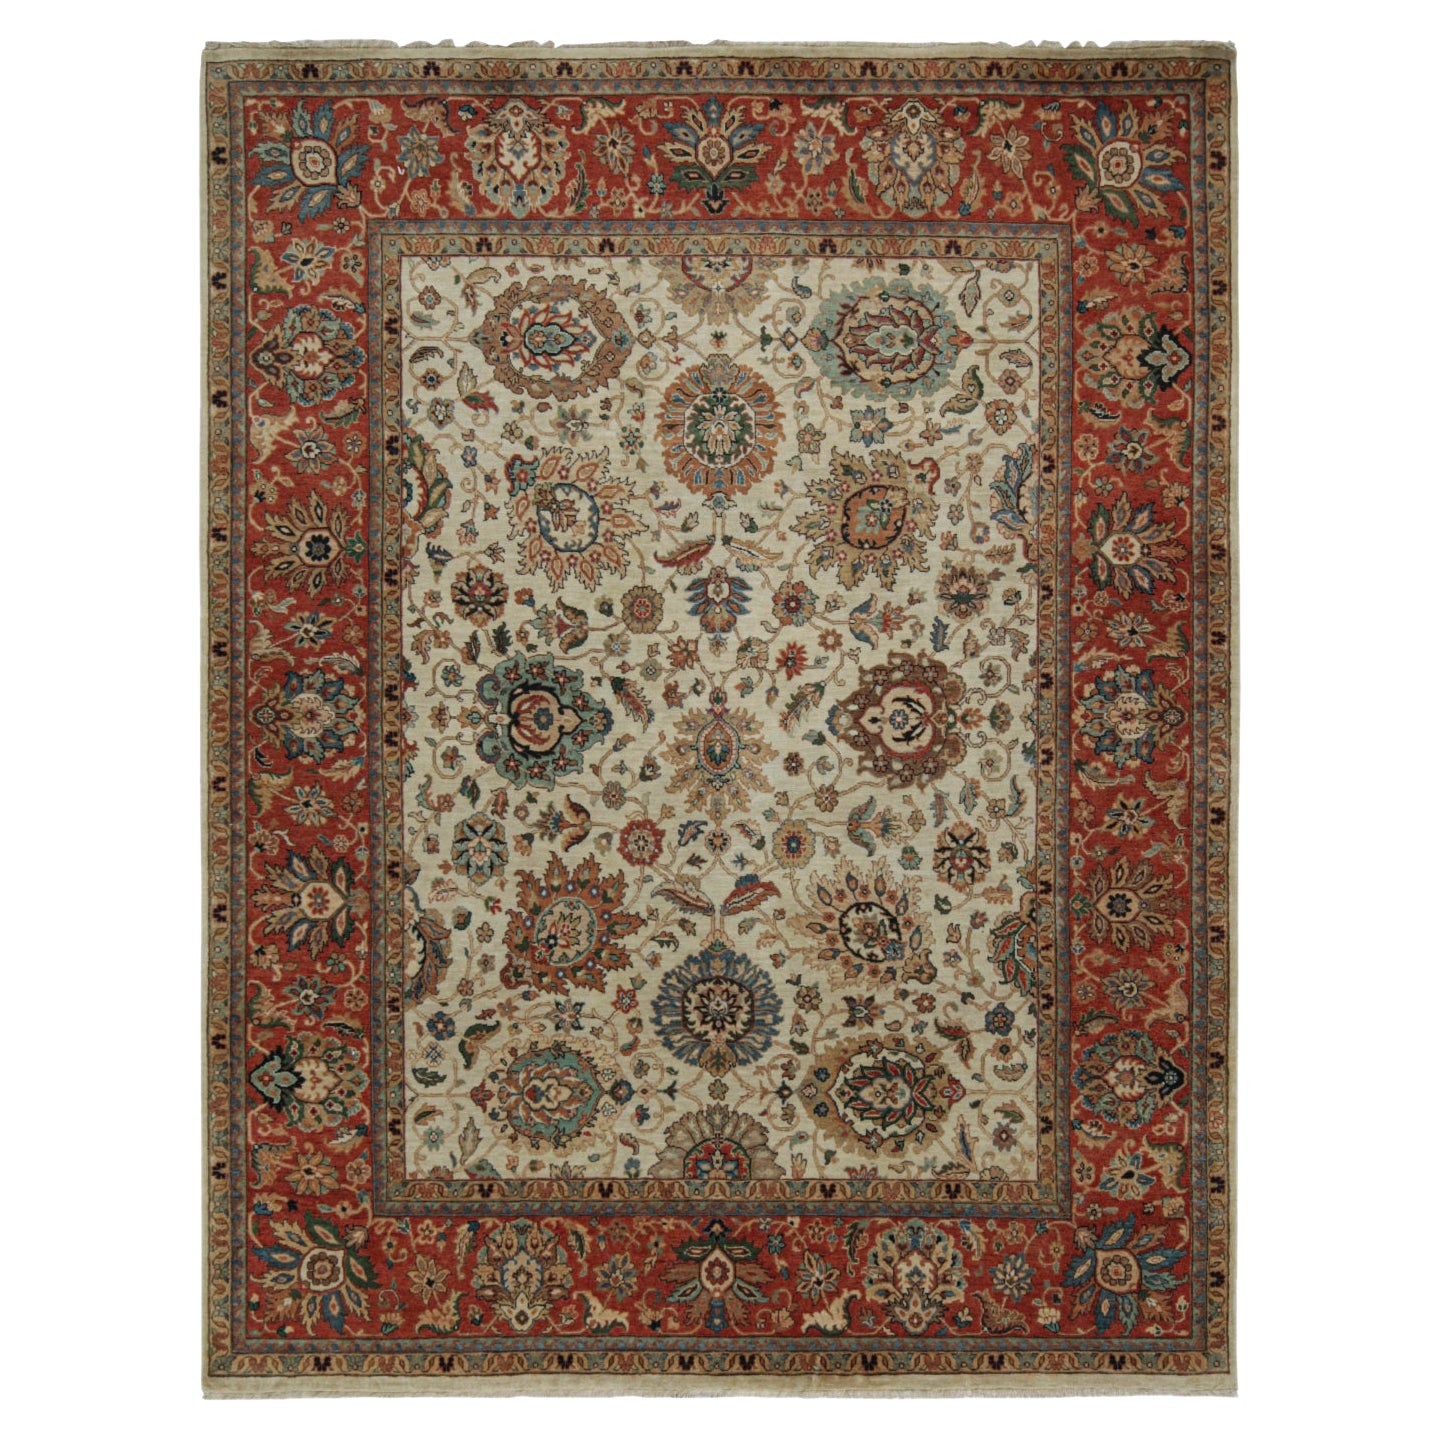 Rug & Kilim’s Persian Style Rug in Beige and Red with Floral Patterns